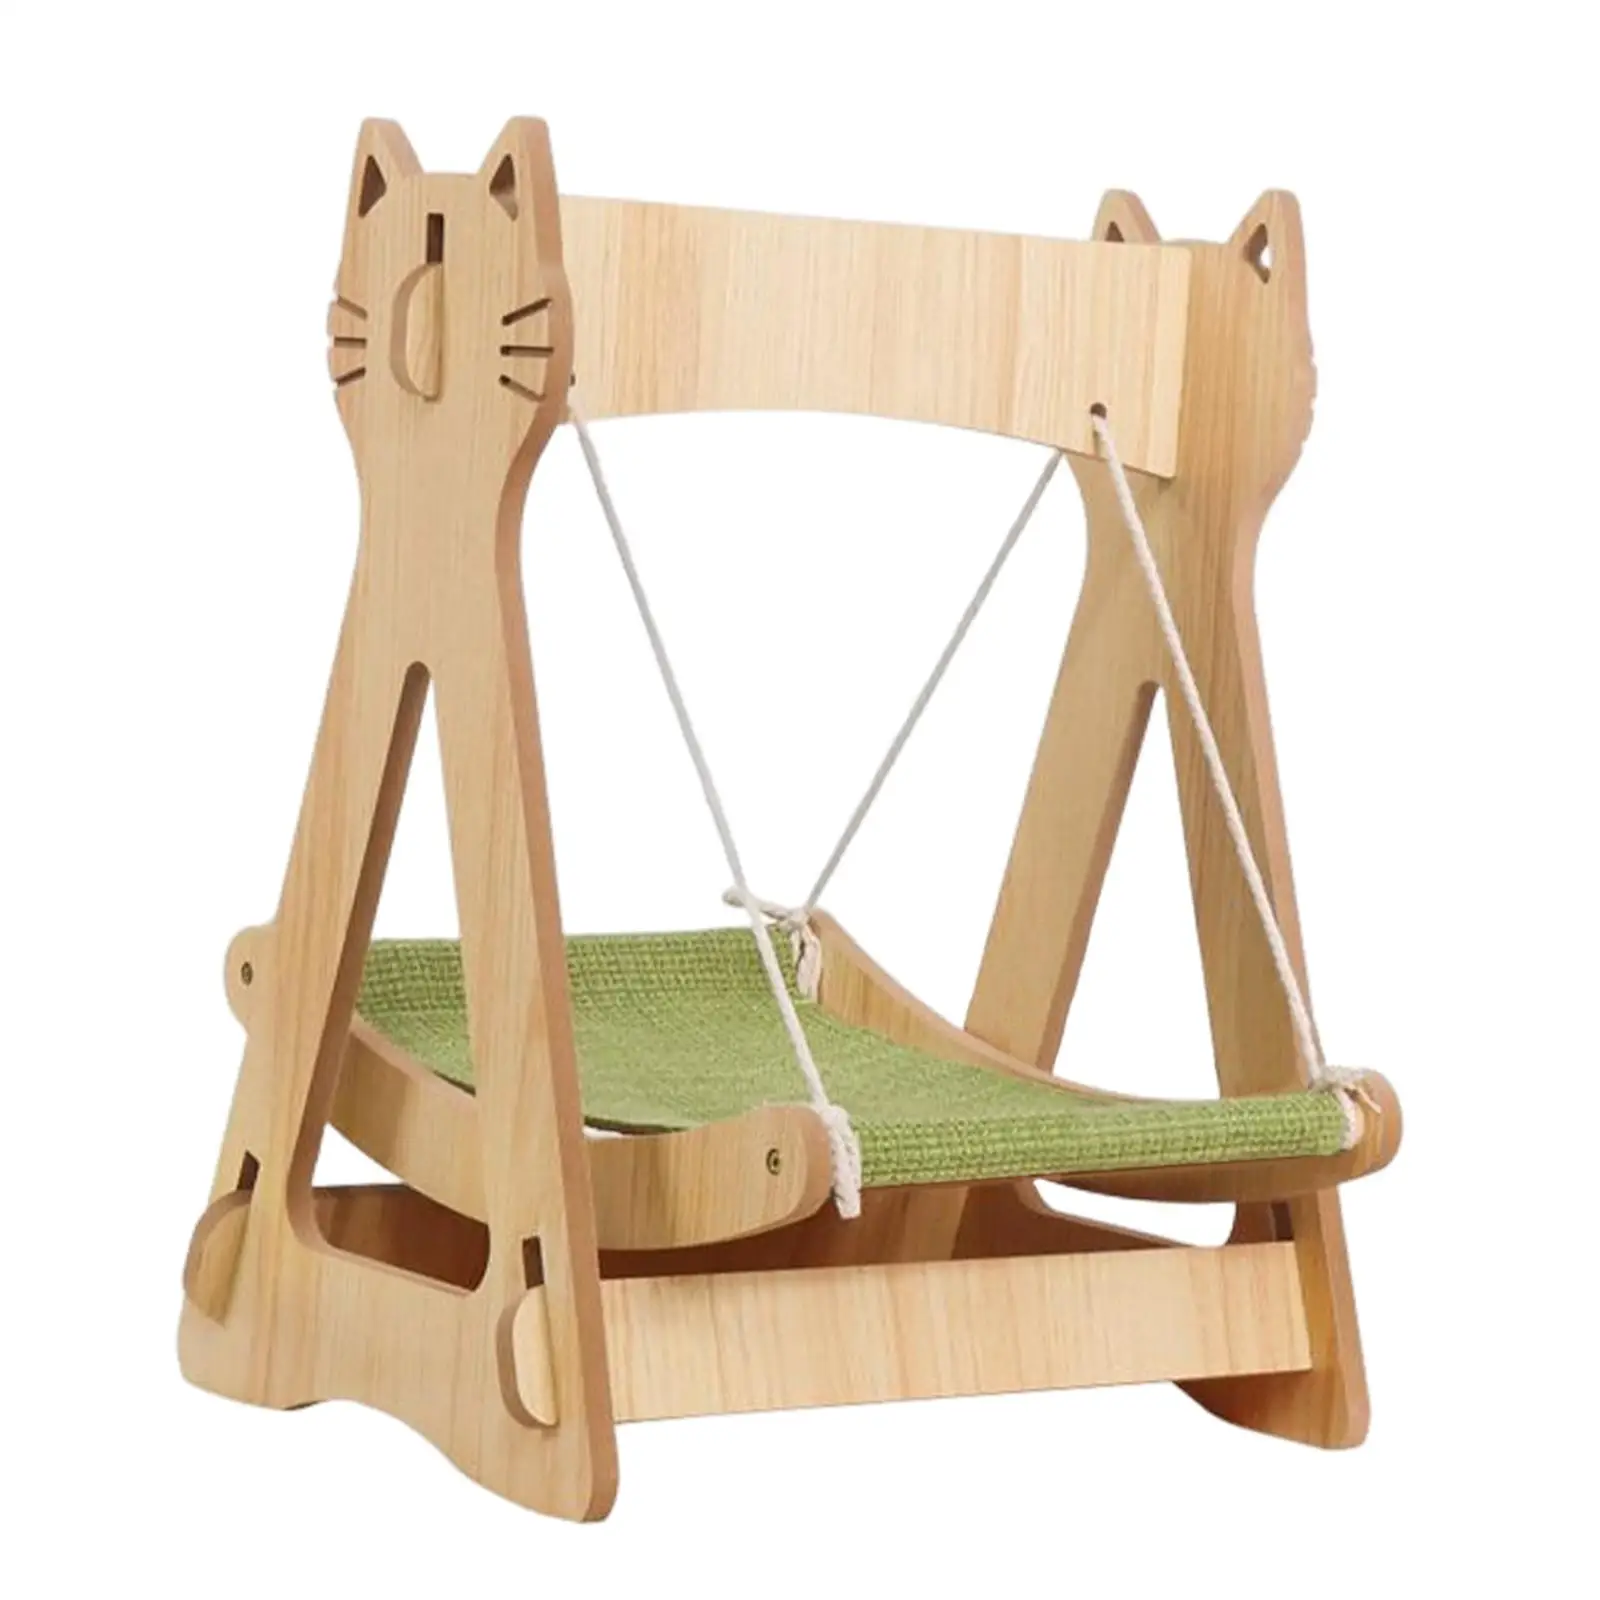 Cat Hammock Activity Toy Pet Bed Lounger Wood Frame Stable Structure Pet Hanging